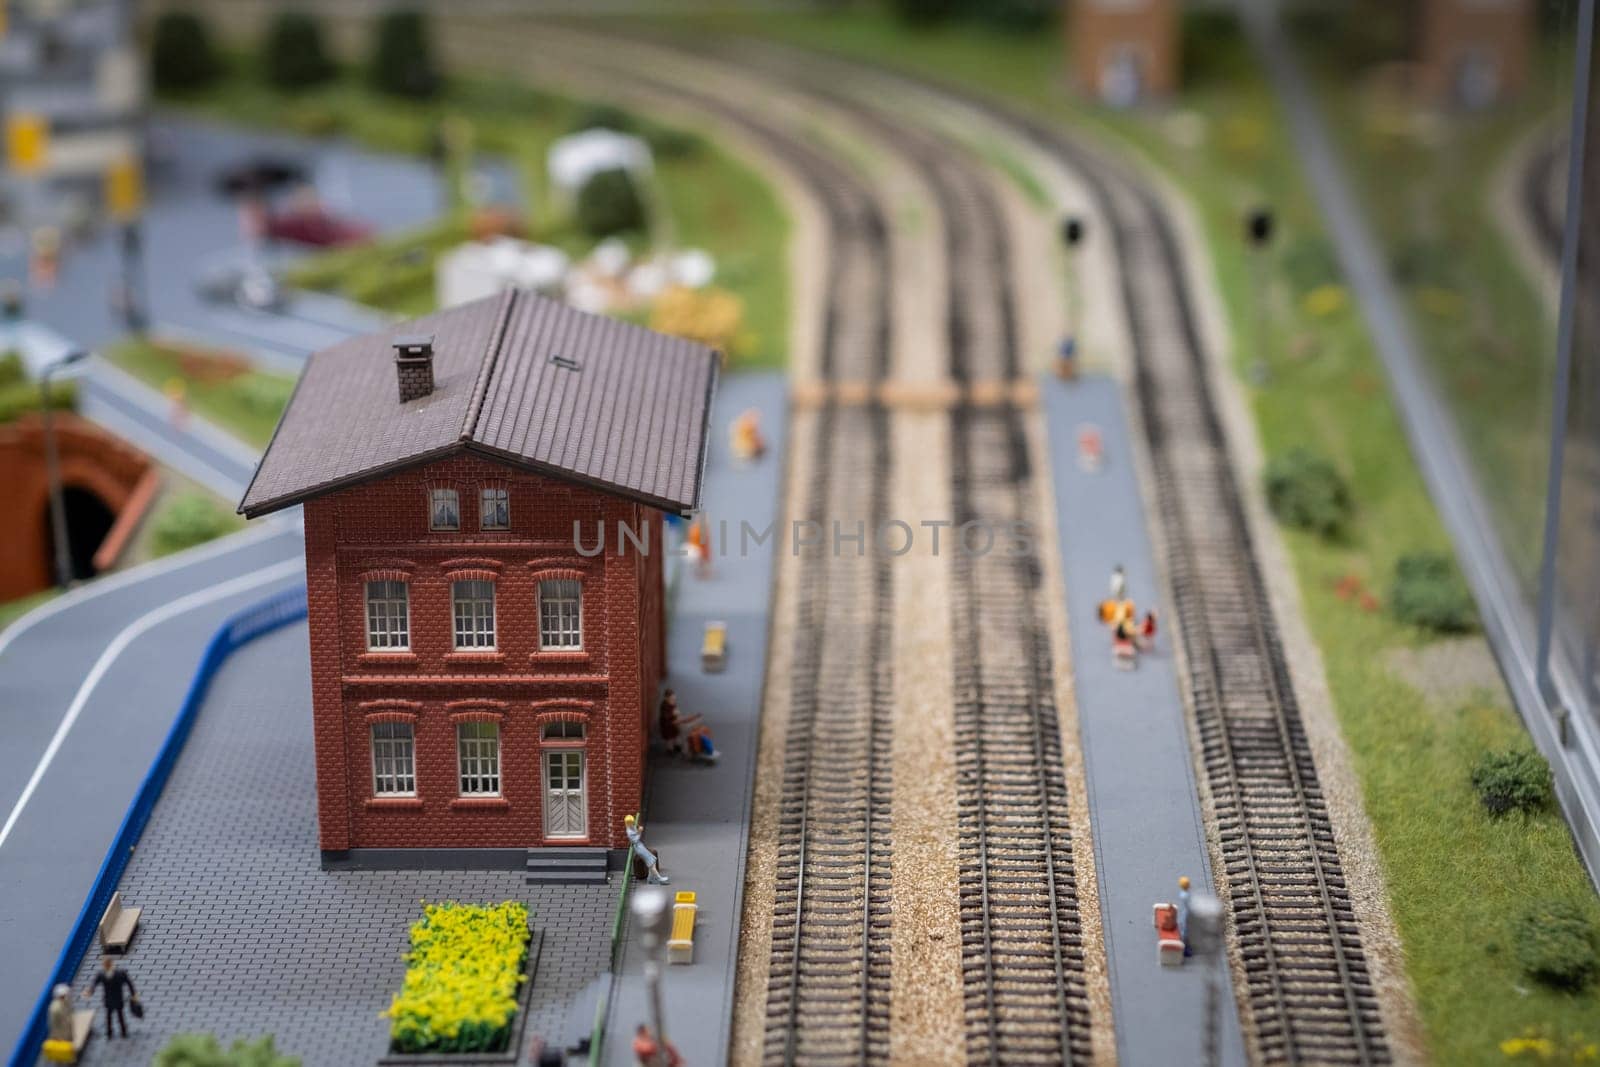 A layout on the scale of urban objects, a railway and various transport as a layout of the city.